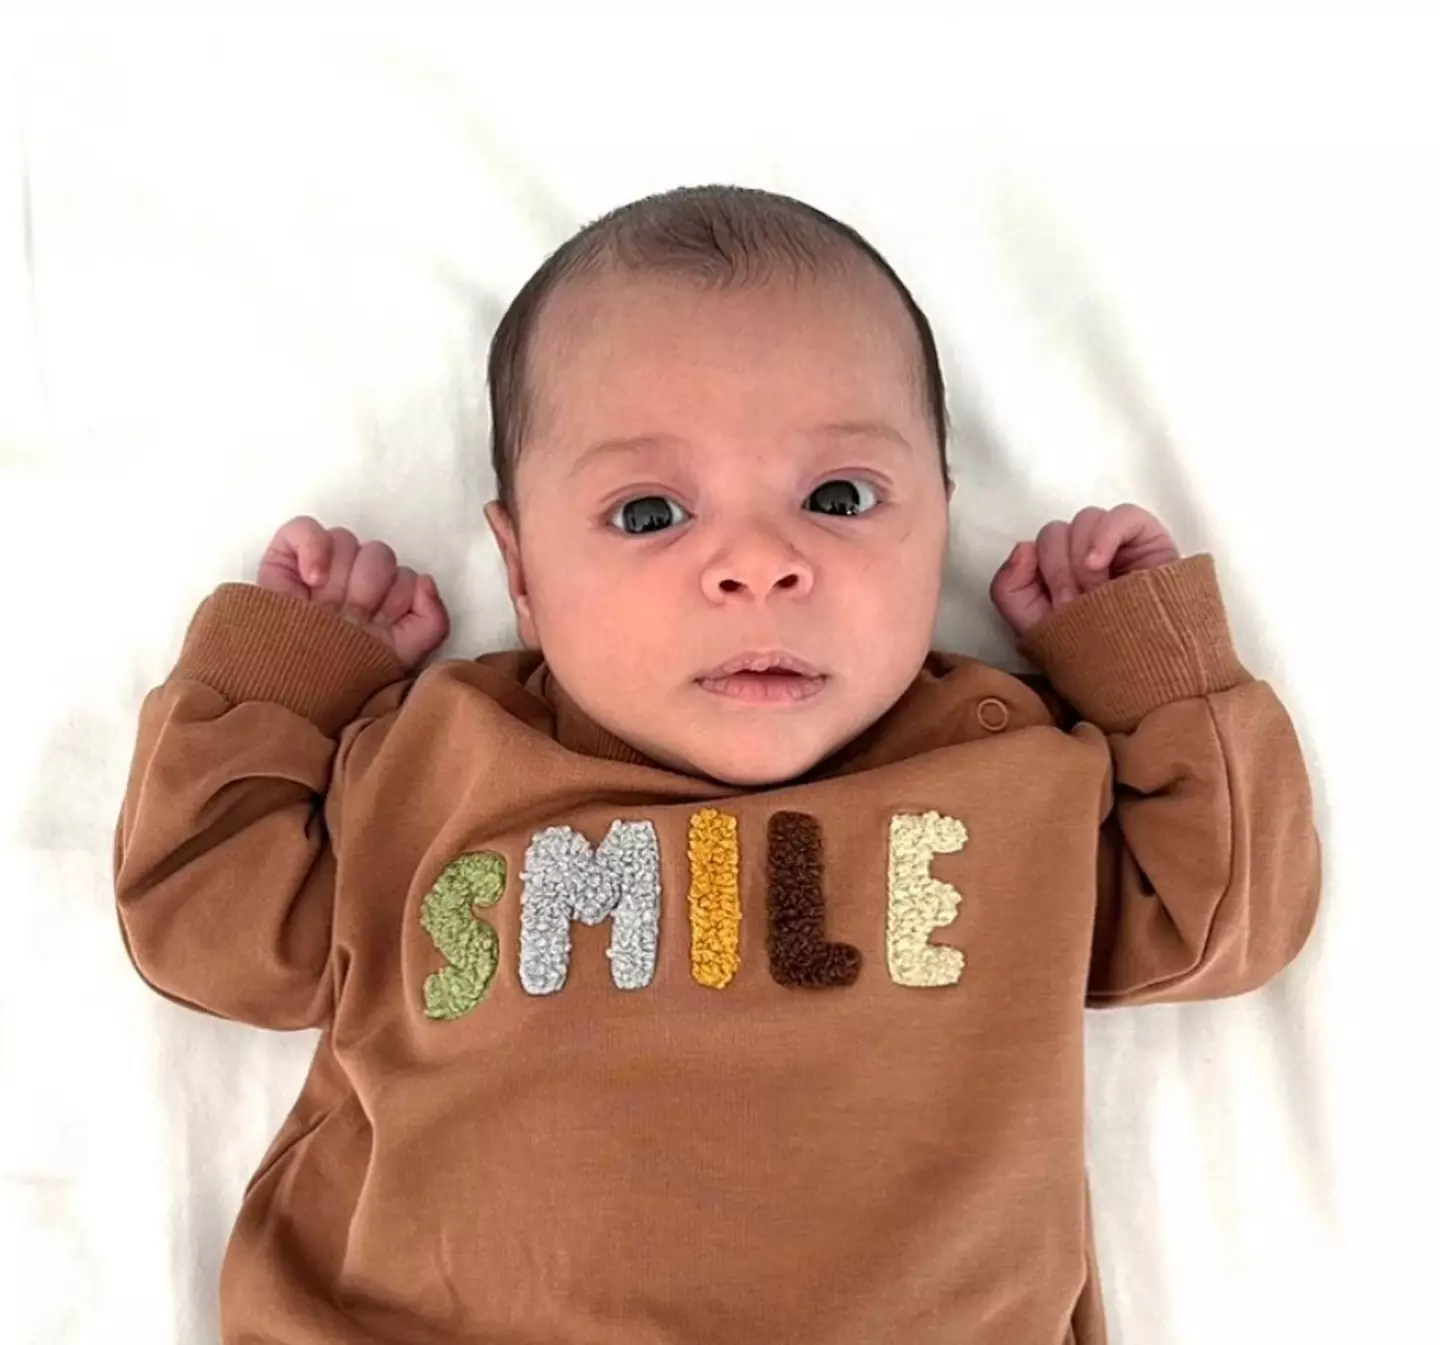 Jessie shared an adorable snap of her son while revealing his full name: Sky Safir Cornish Colman.